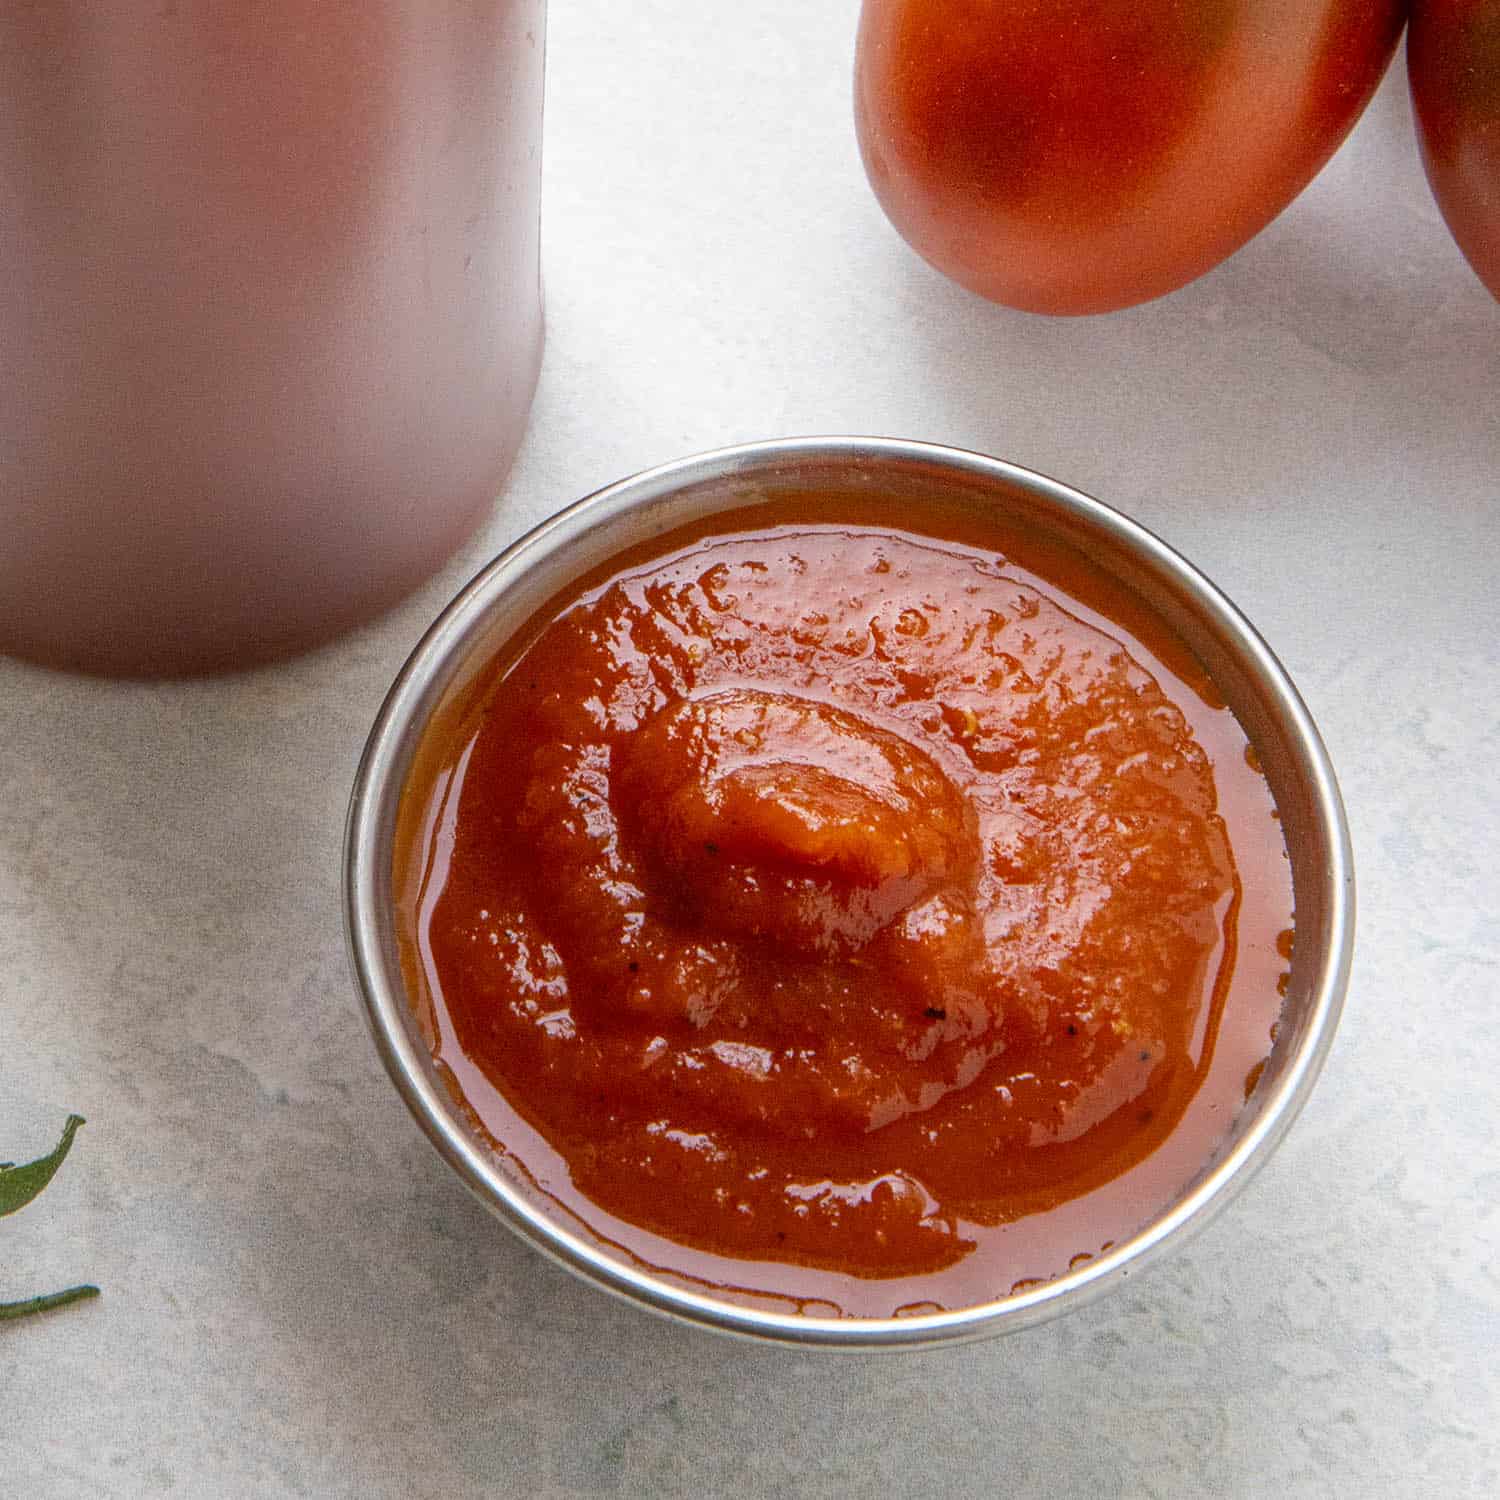 Homemade Ketchup Recipe (+ Spicy Ketchup) - Chili Pepper Madness